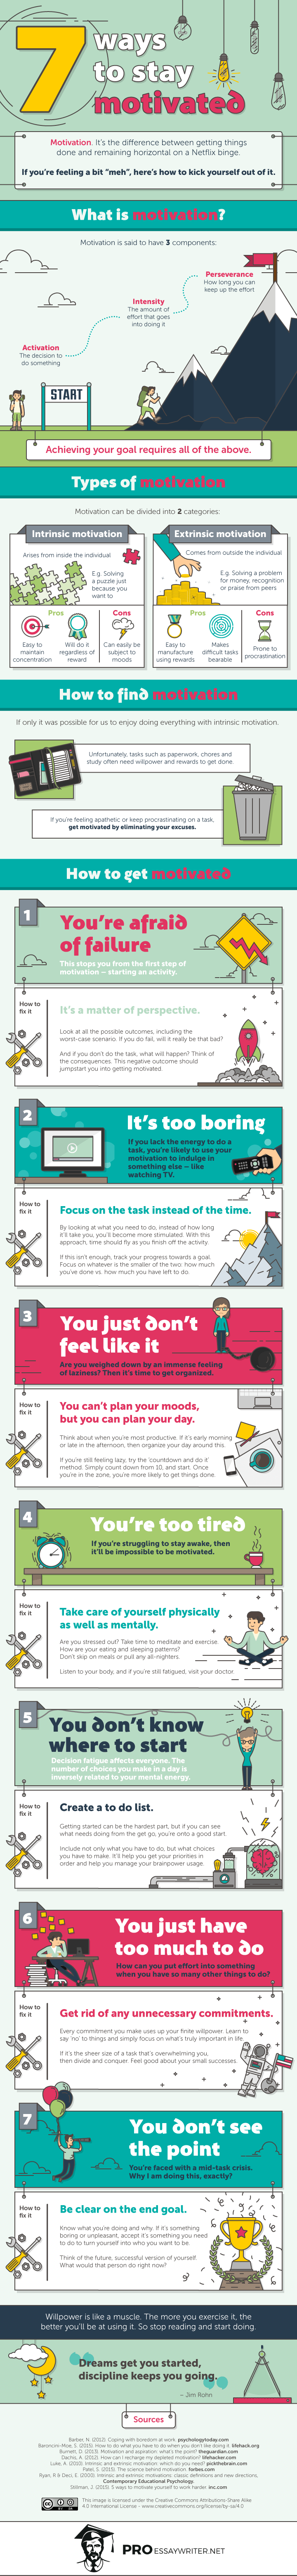 "7 Ways to Stay Motivated" Infographic. Details in text following image.